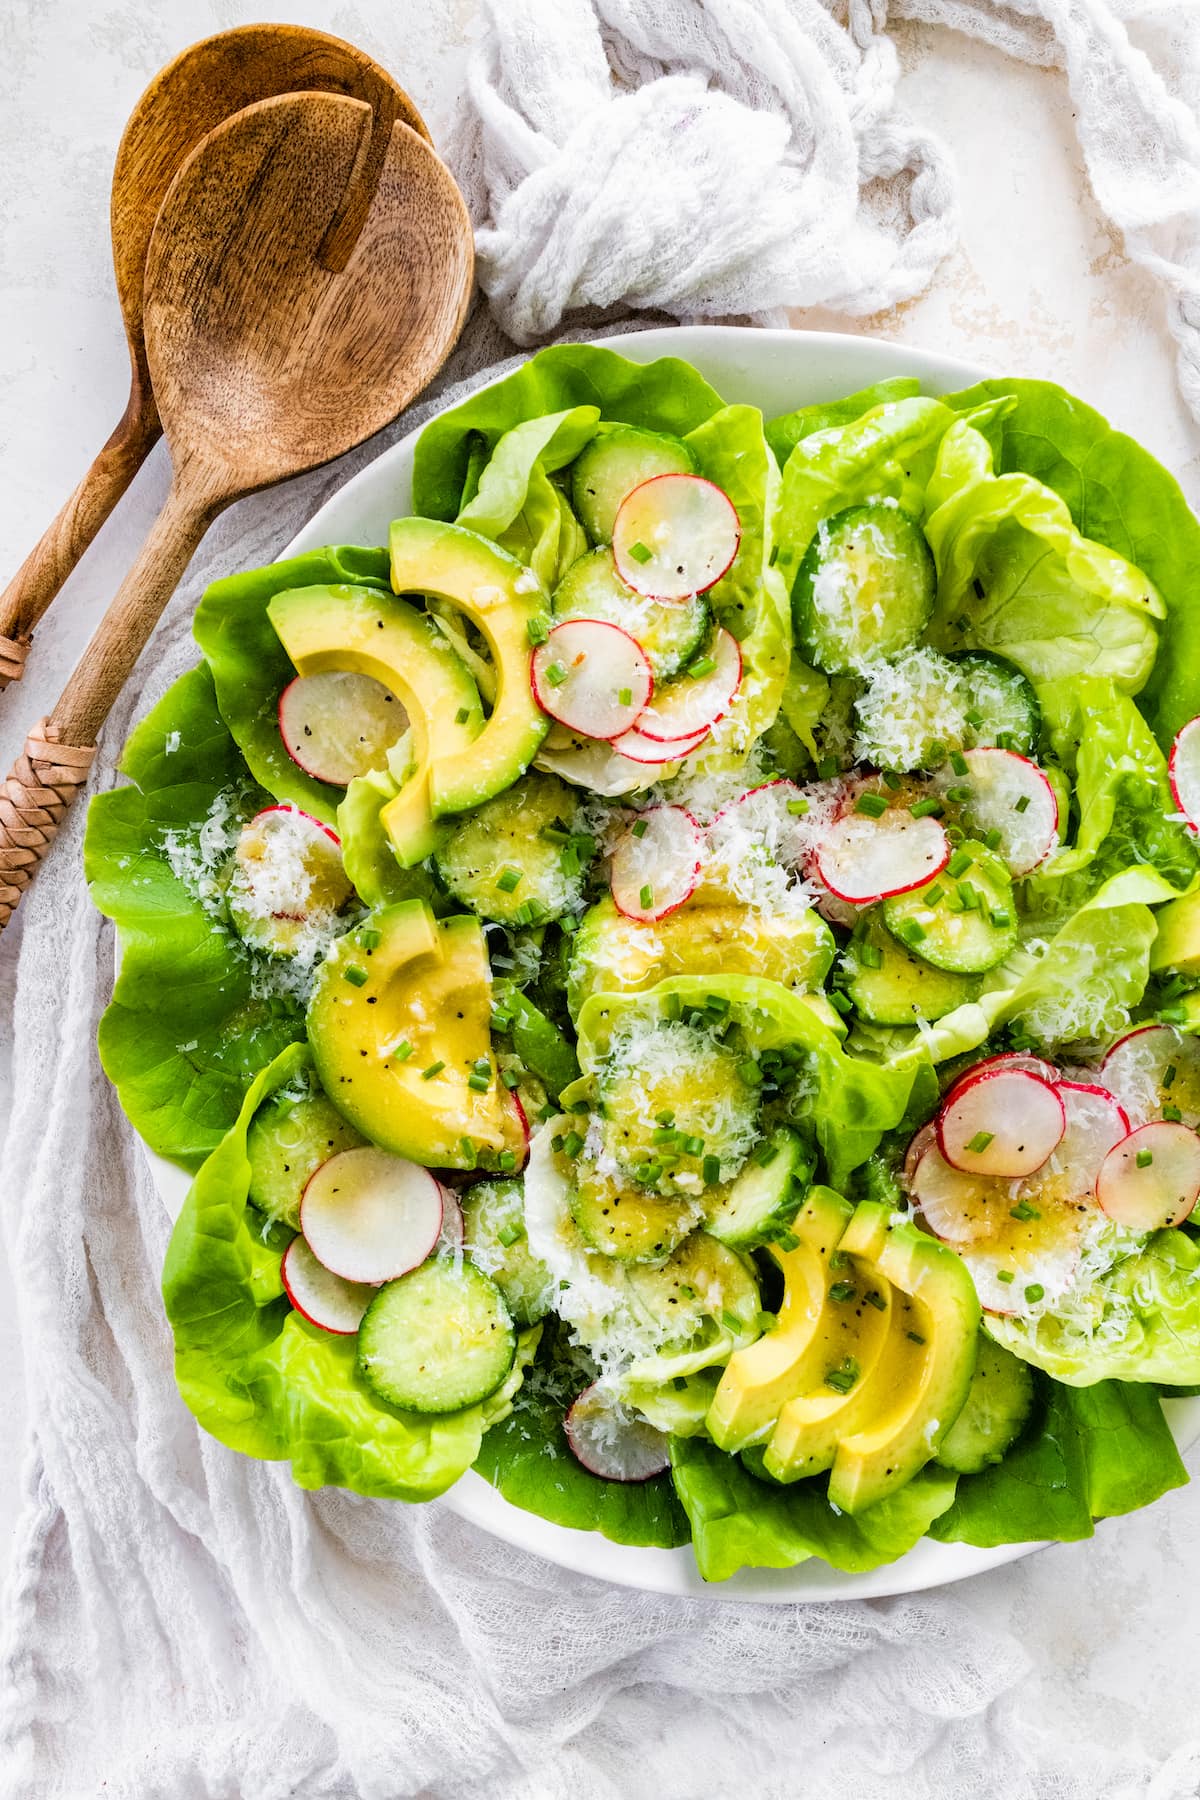 butter lettuce salad with avocado, cucumber, radish slices, chives, Parmesan cheese, and lemon dressing In large white bowl with wood salad servers. 